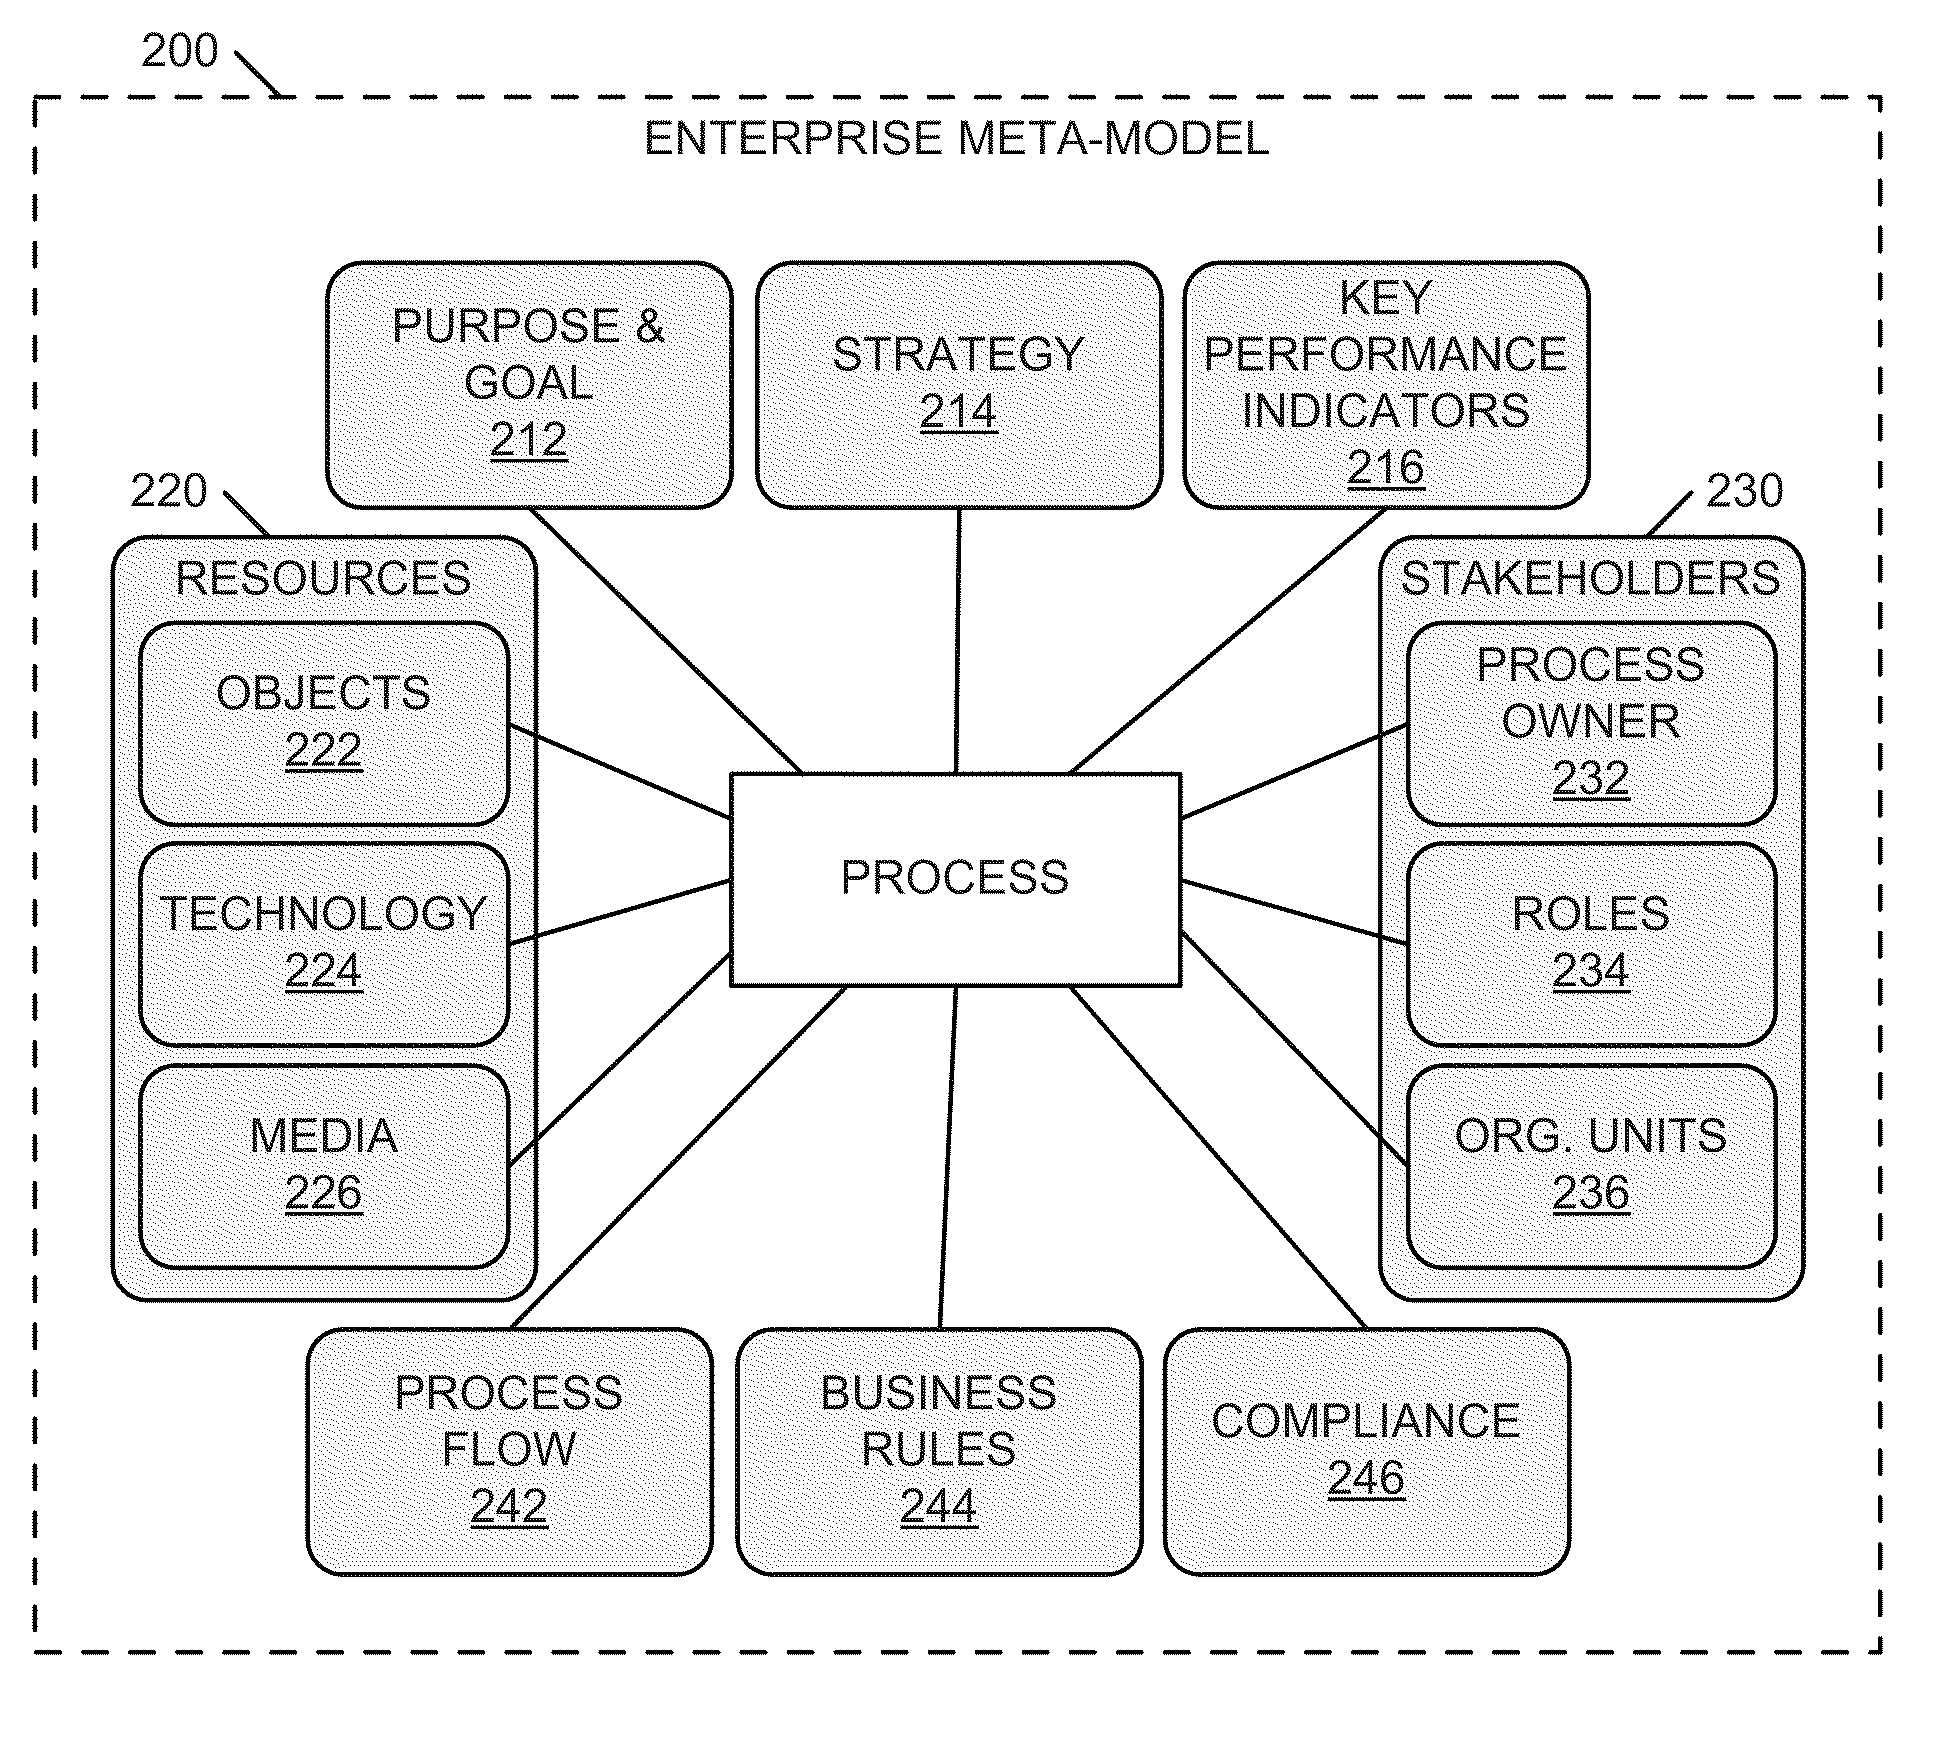 Systems and methods for integrating process perspectives and abstraction levels into process modeling